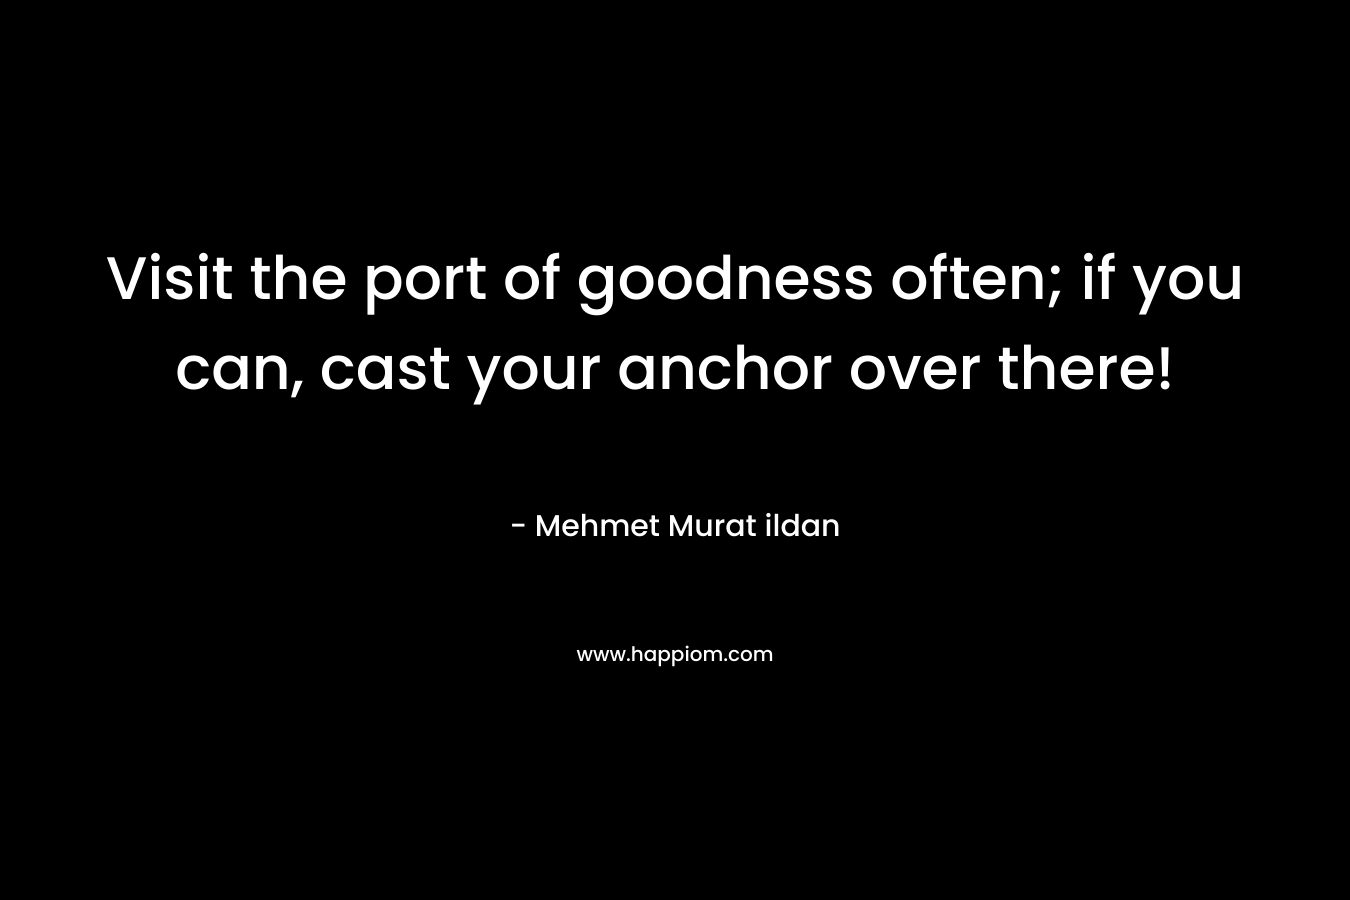 Visit the port of goodness often; if you can, cast your anchor over there! – Mehmet Murat ildan